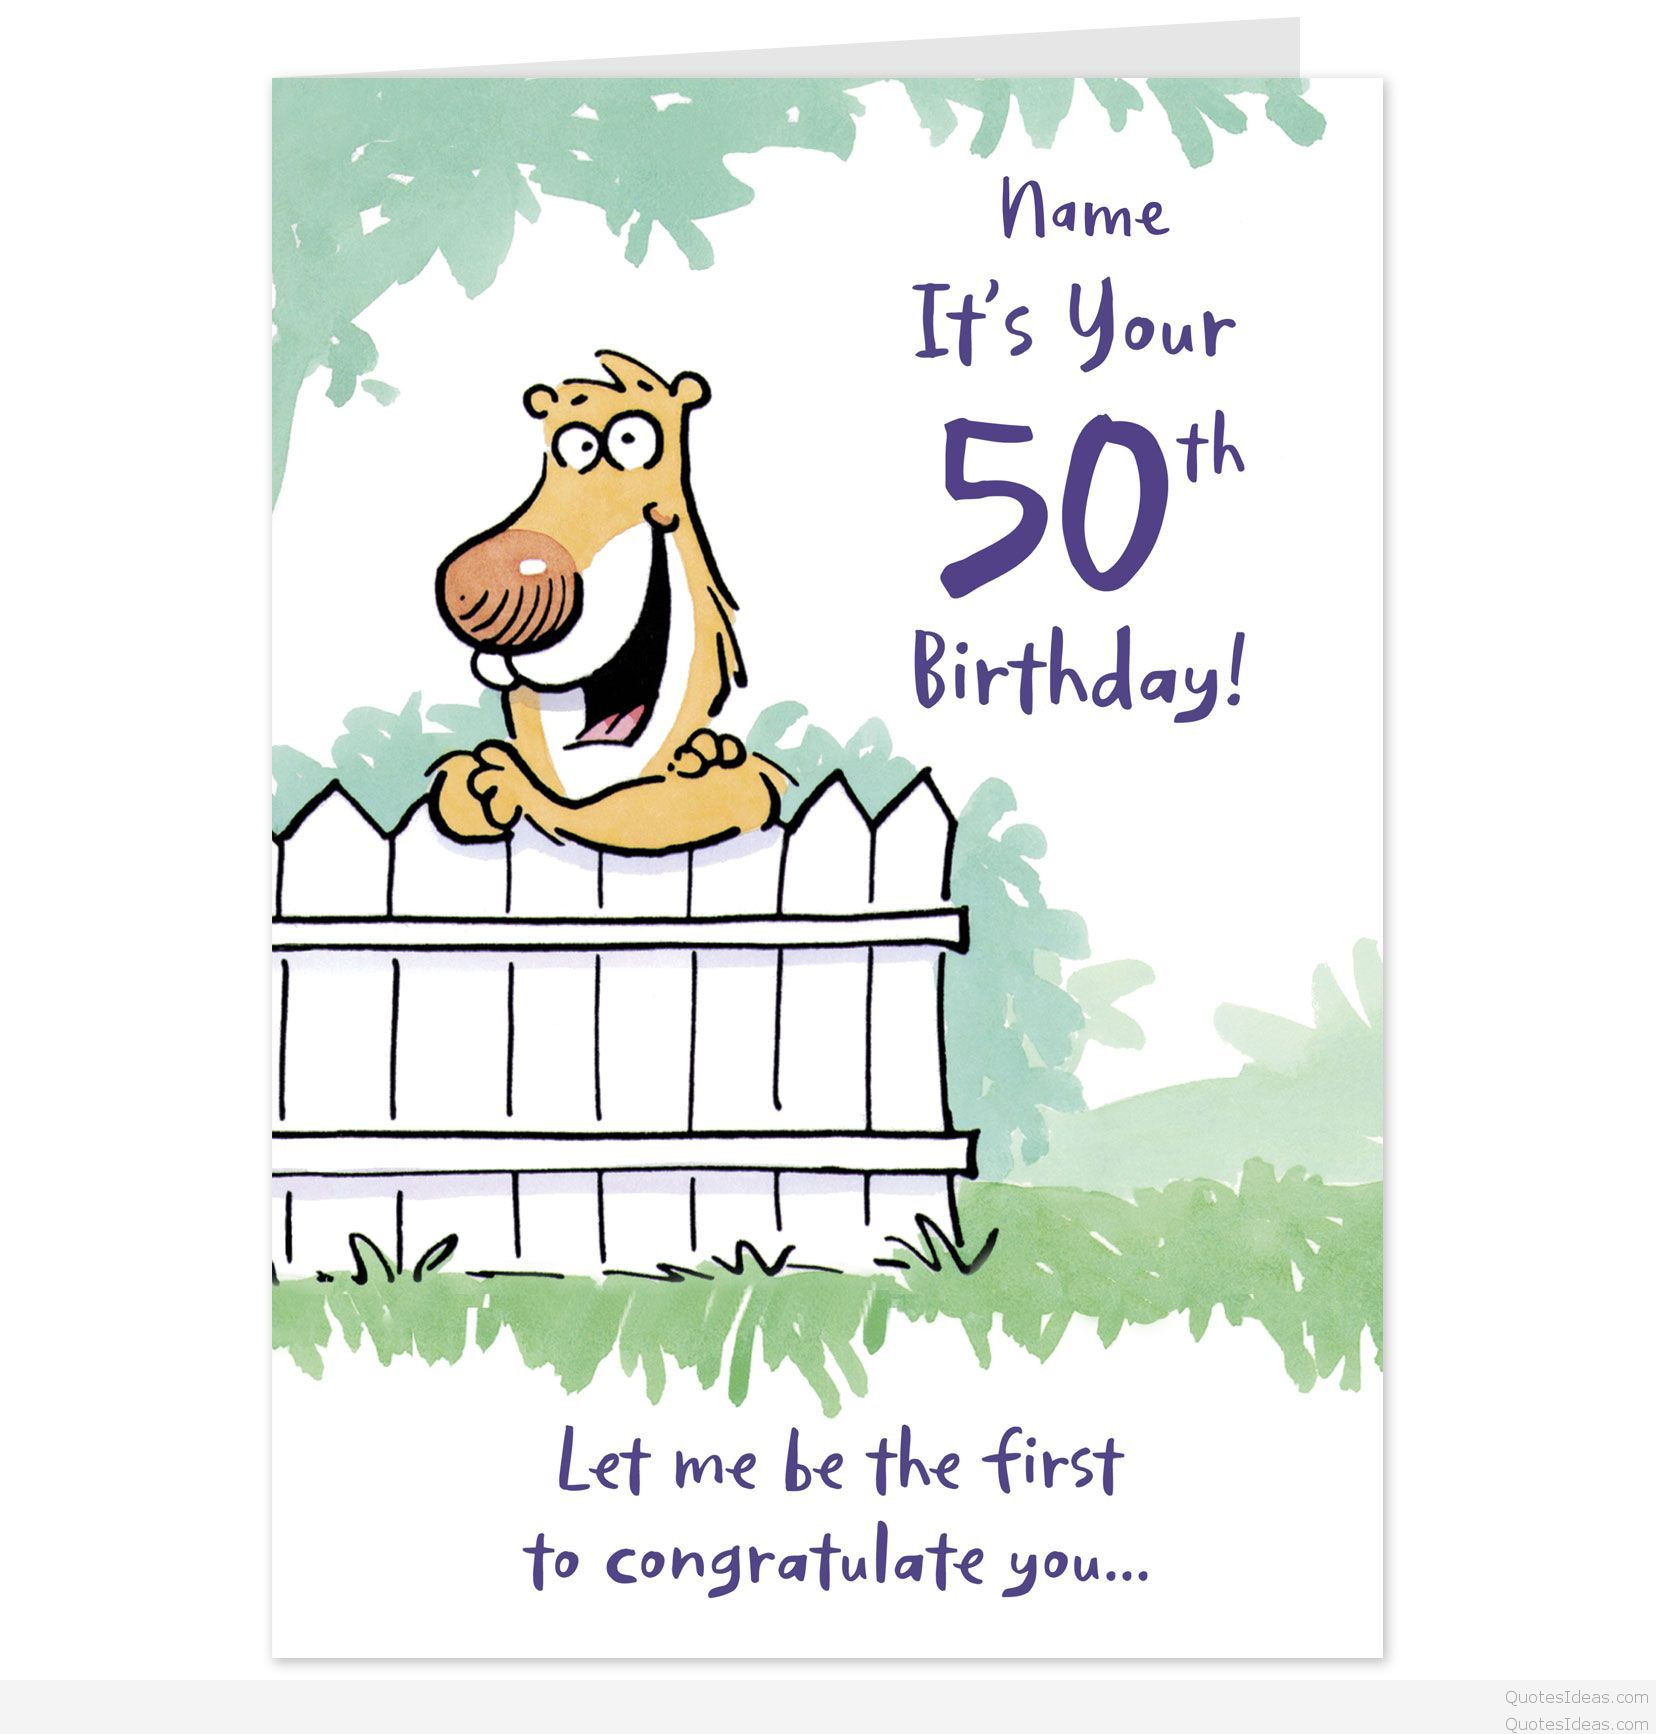 Birthday Card Quotes Funny
 Latest funny cards quotes and sayings